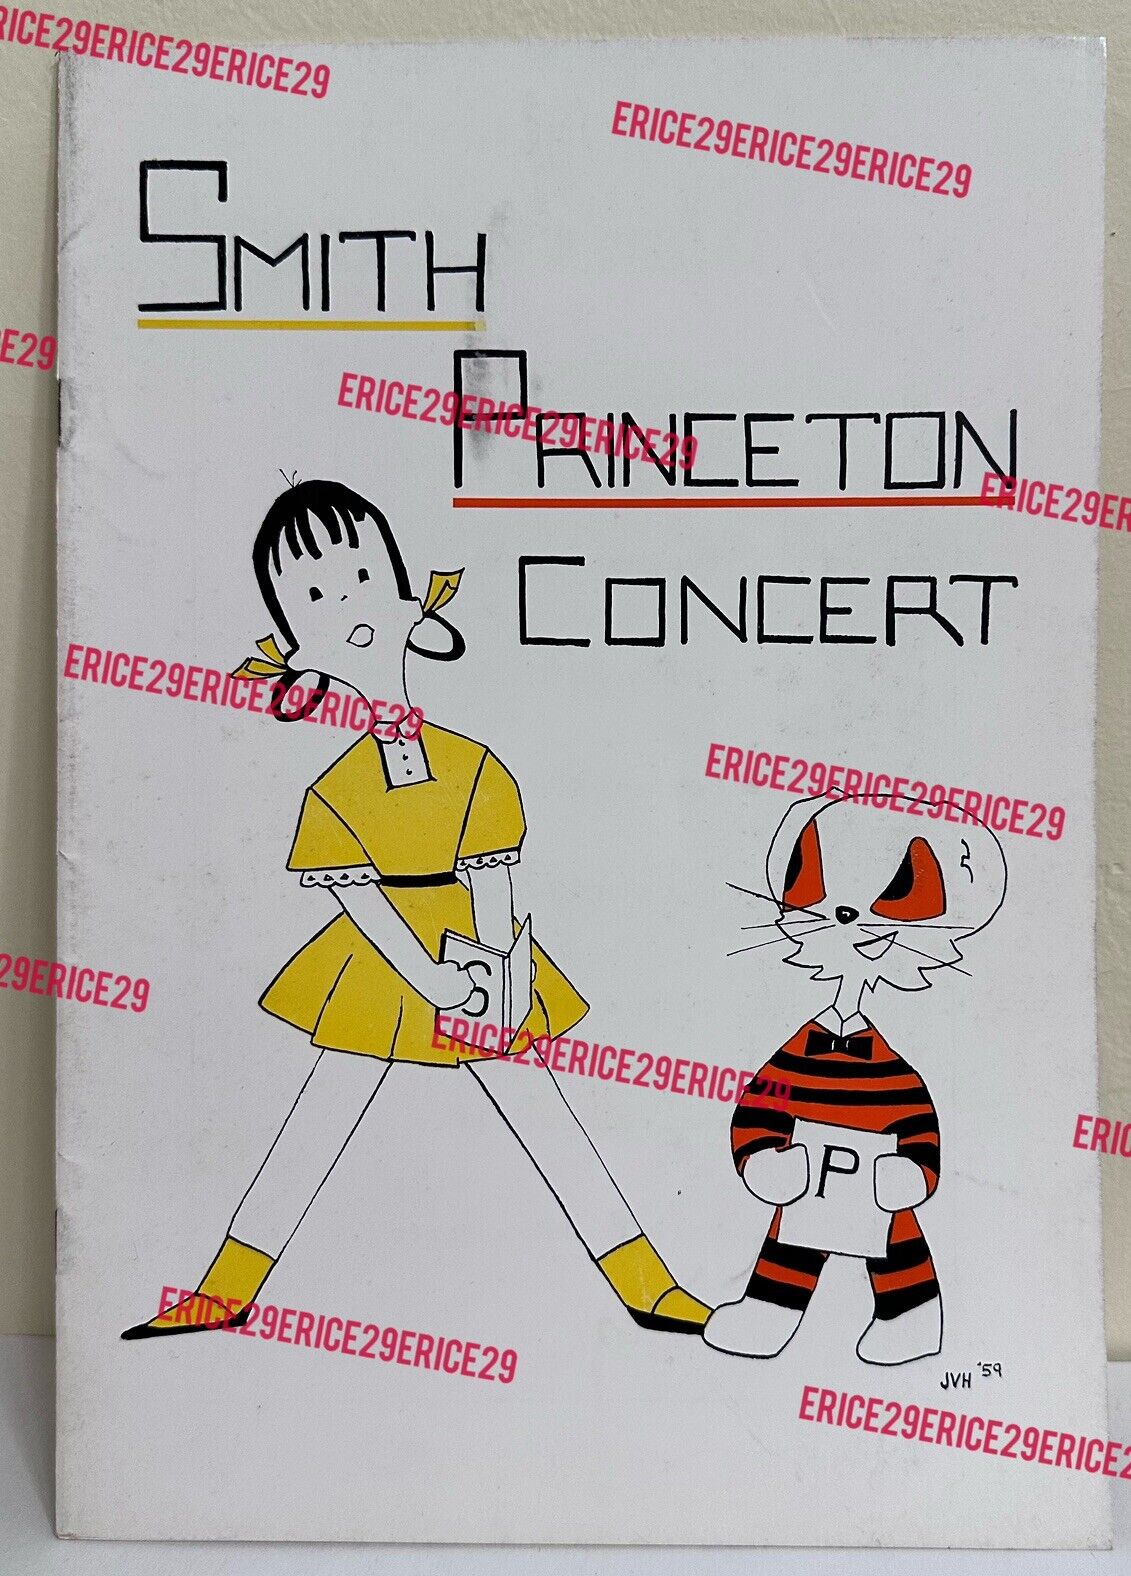 1956 The Smith College Choir & The Princeton University Glee Club Joint Concert